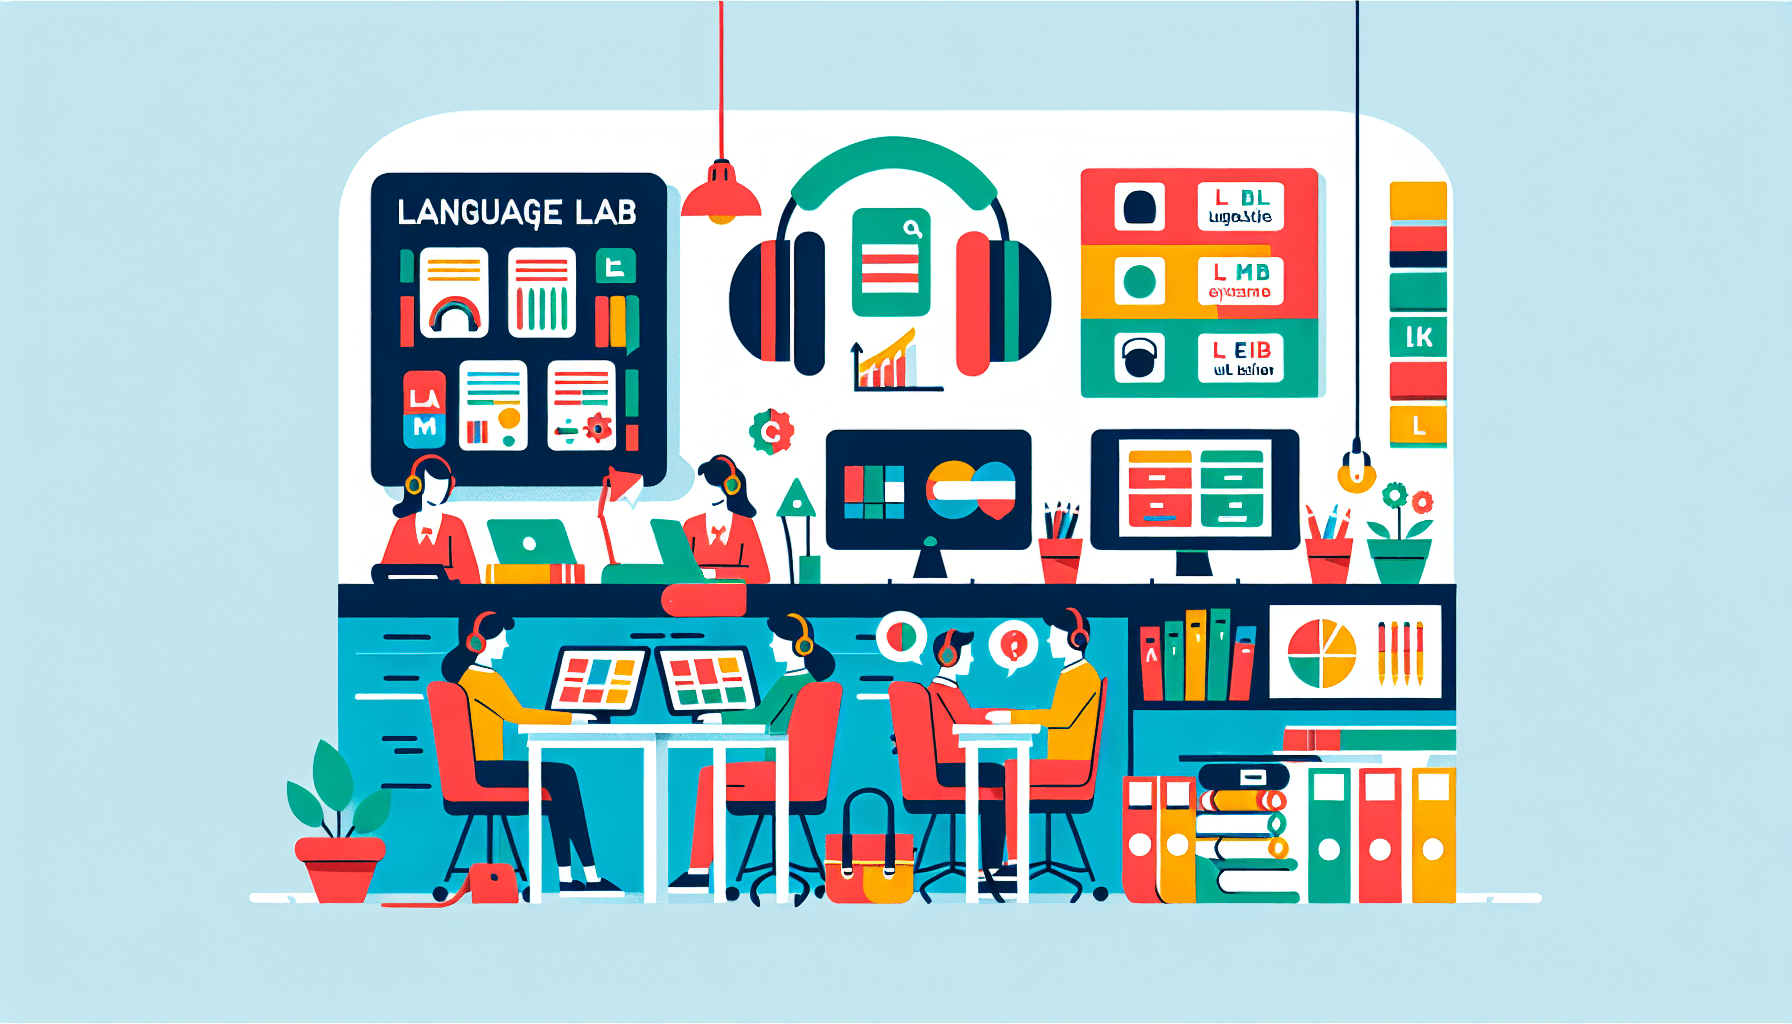 Language lab in flat illustration style and white background, red #f47574, green #88c7a8, yellow #fcc44b, and blue #645bc8 colors.